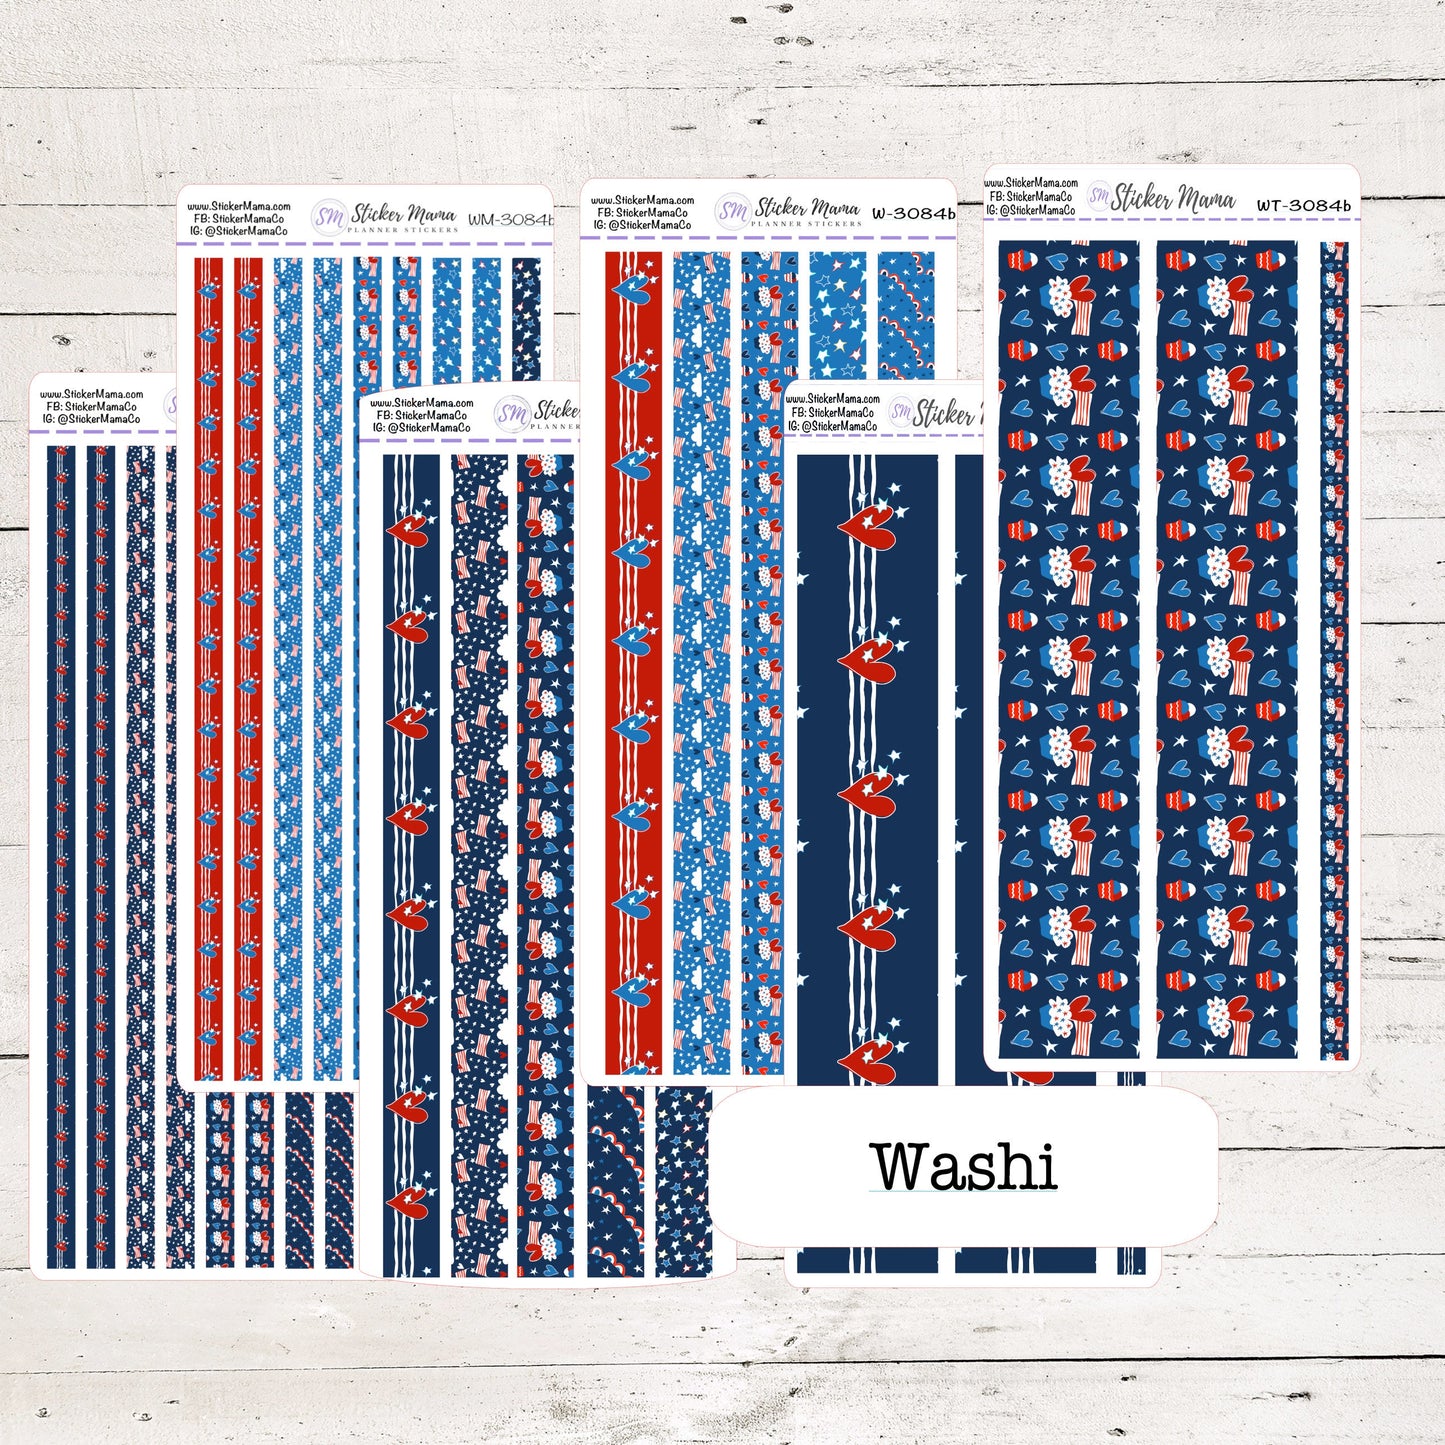 W-3084 - WASHI STICKERS - 4th of July - Planner Stickers - Washi for Planners